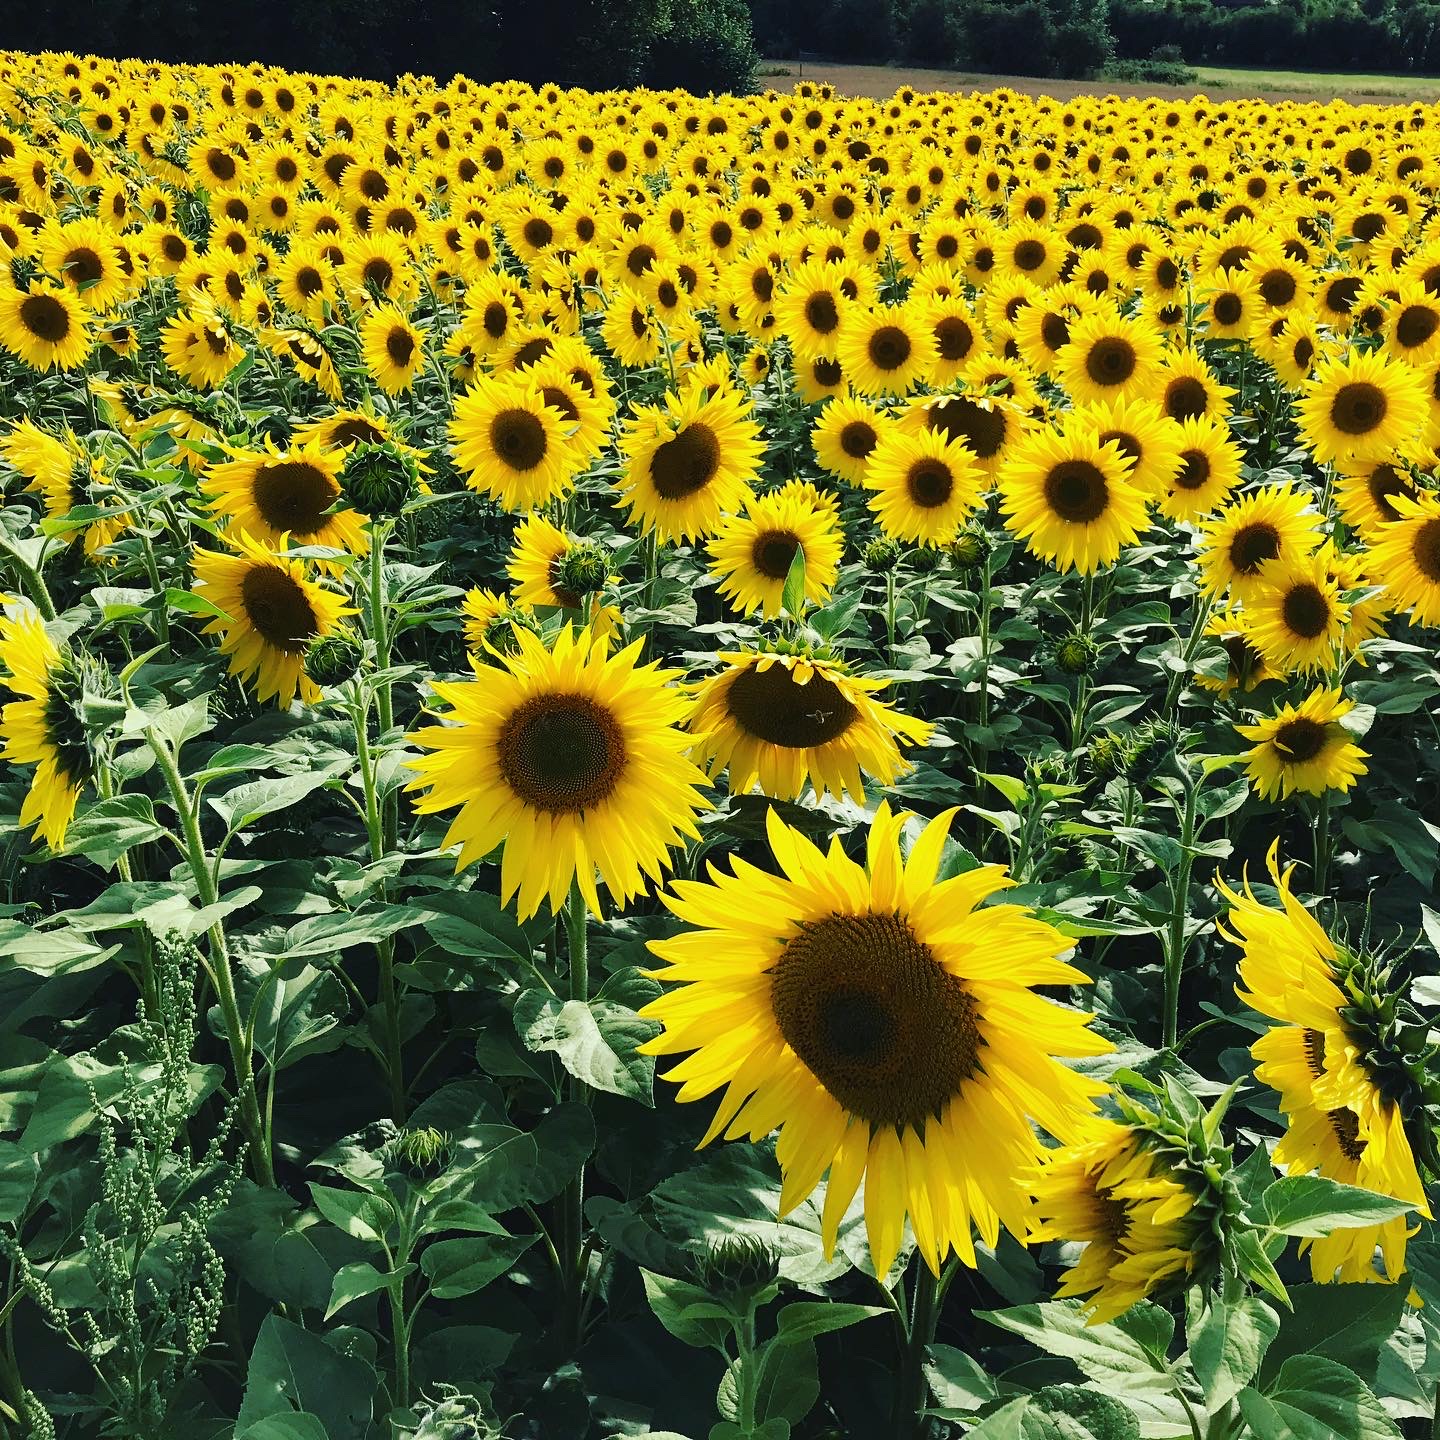 Sunflowers at Punchbowl Farm